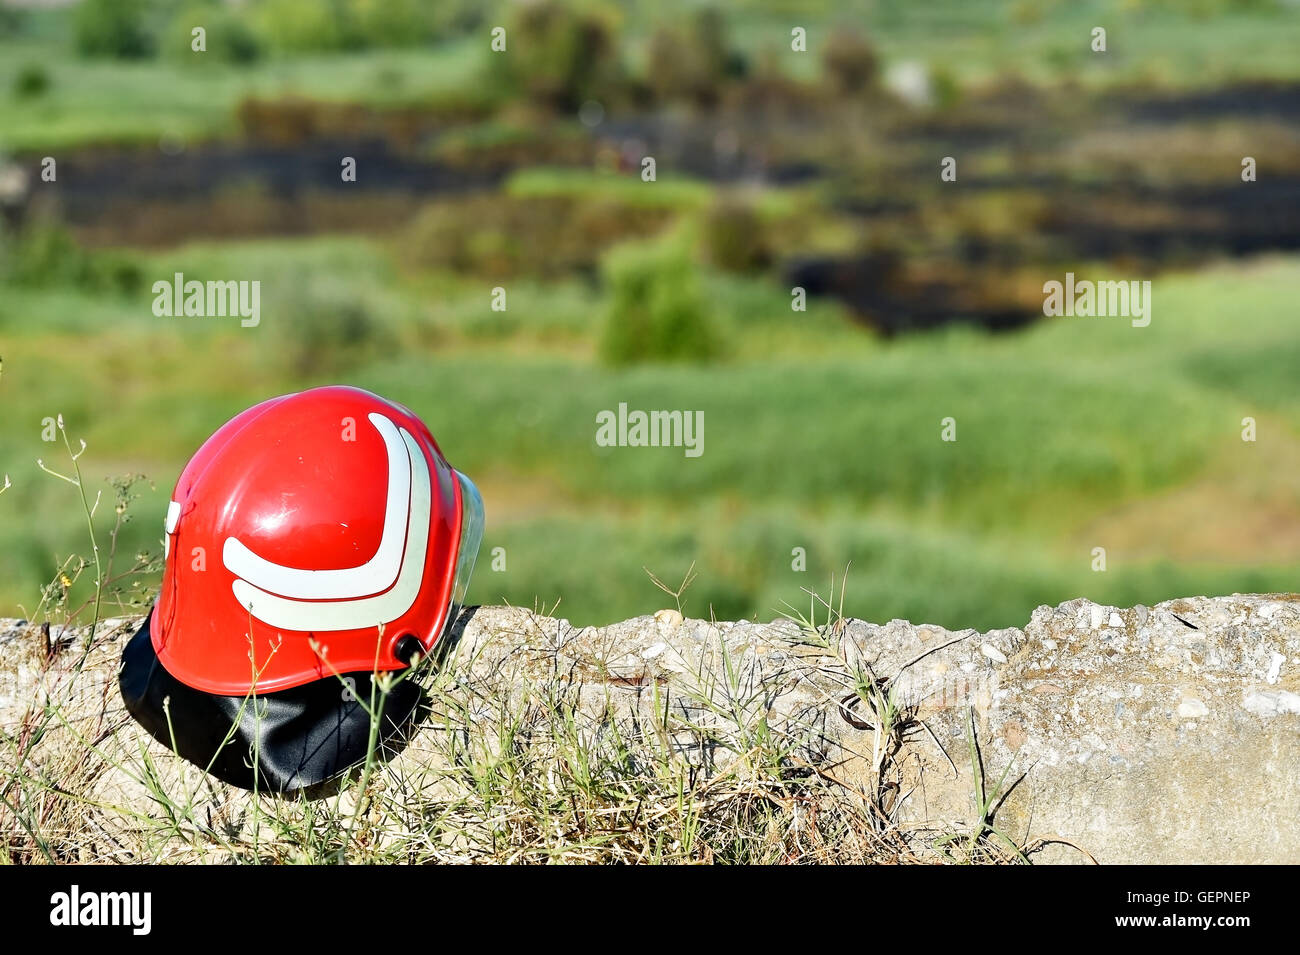 Firefighter helmet on the ground with extinguished fire in background Stock Photo